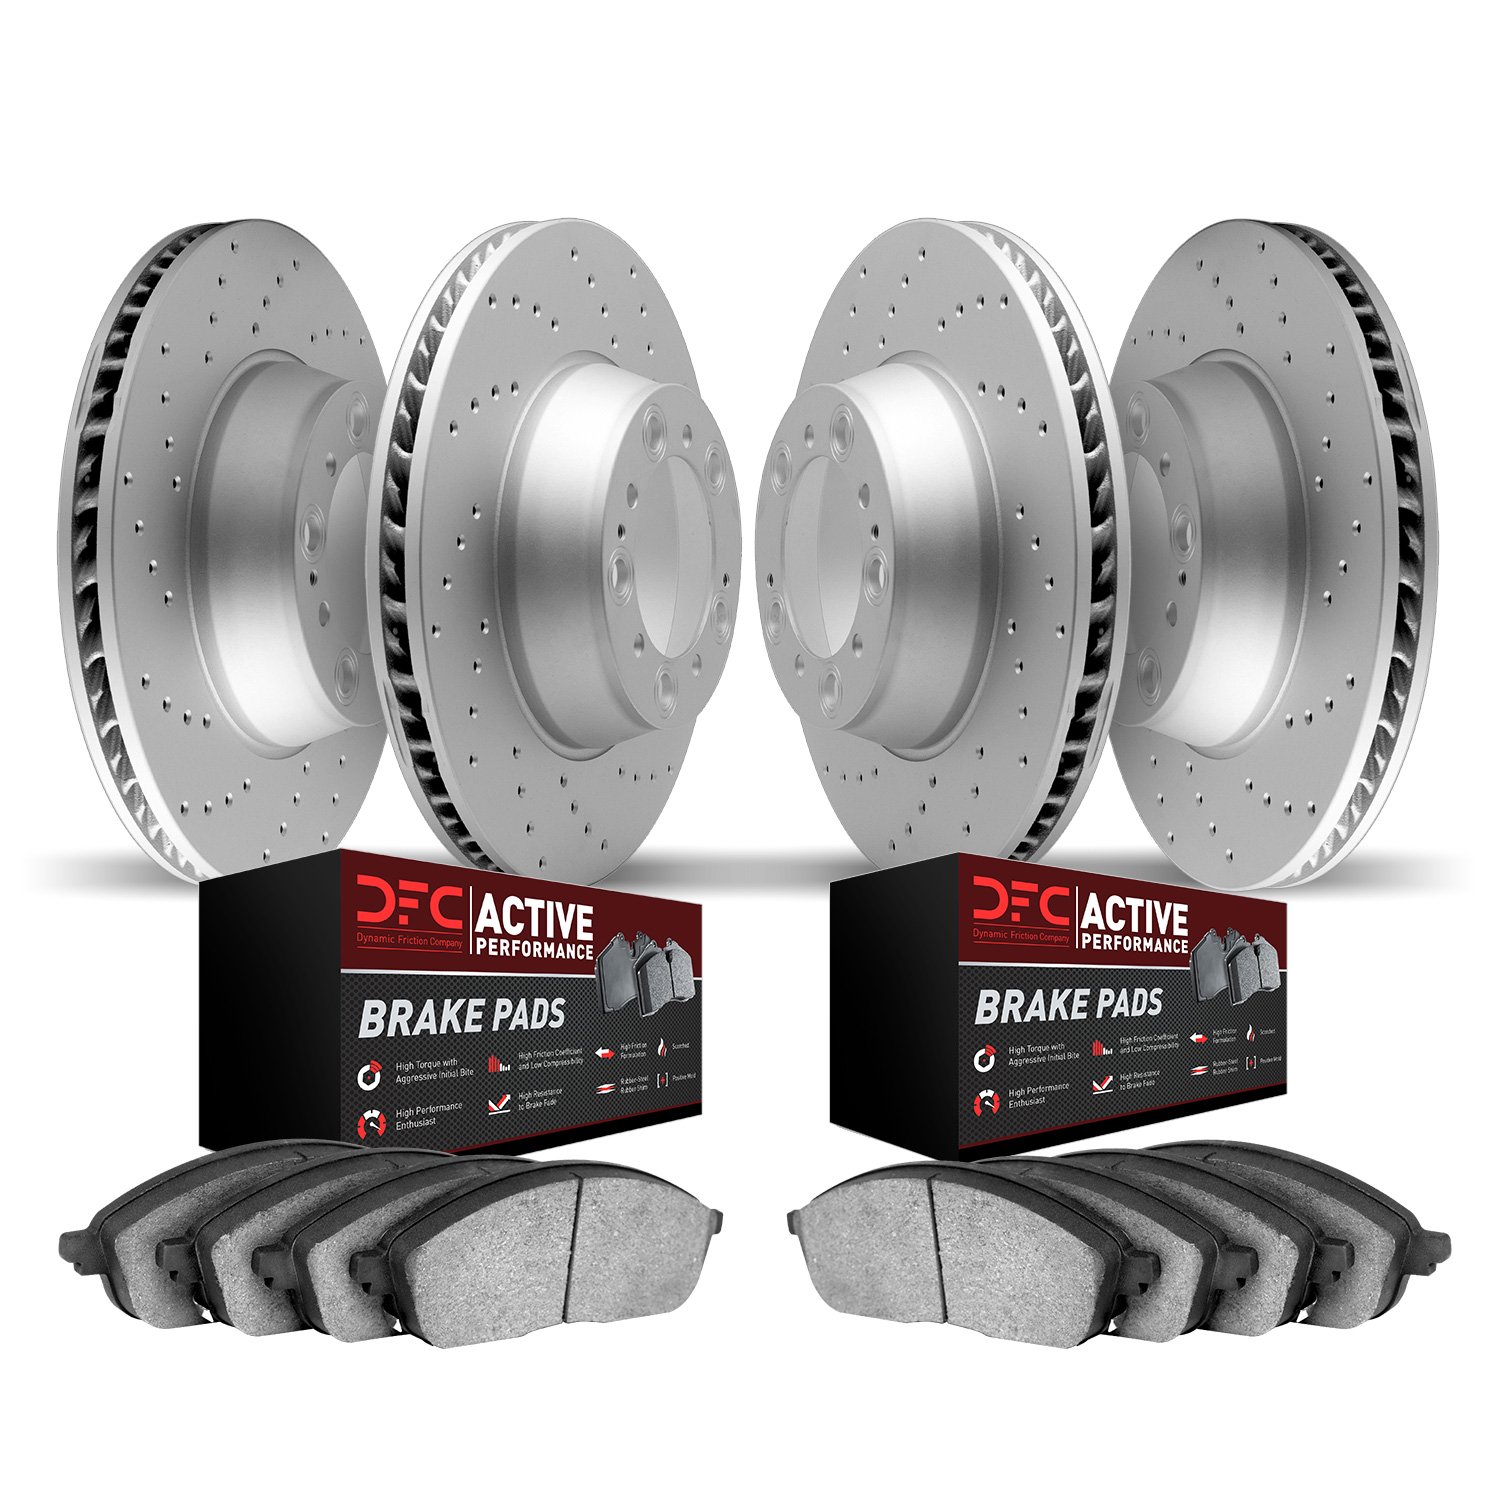 2704-31111 Geoperformance Drilled Brake Rotors with Active Performance Pads Kit, 2013-2018 BMW, Position: Front and Rear